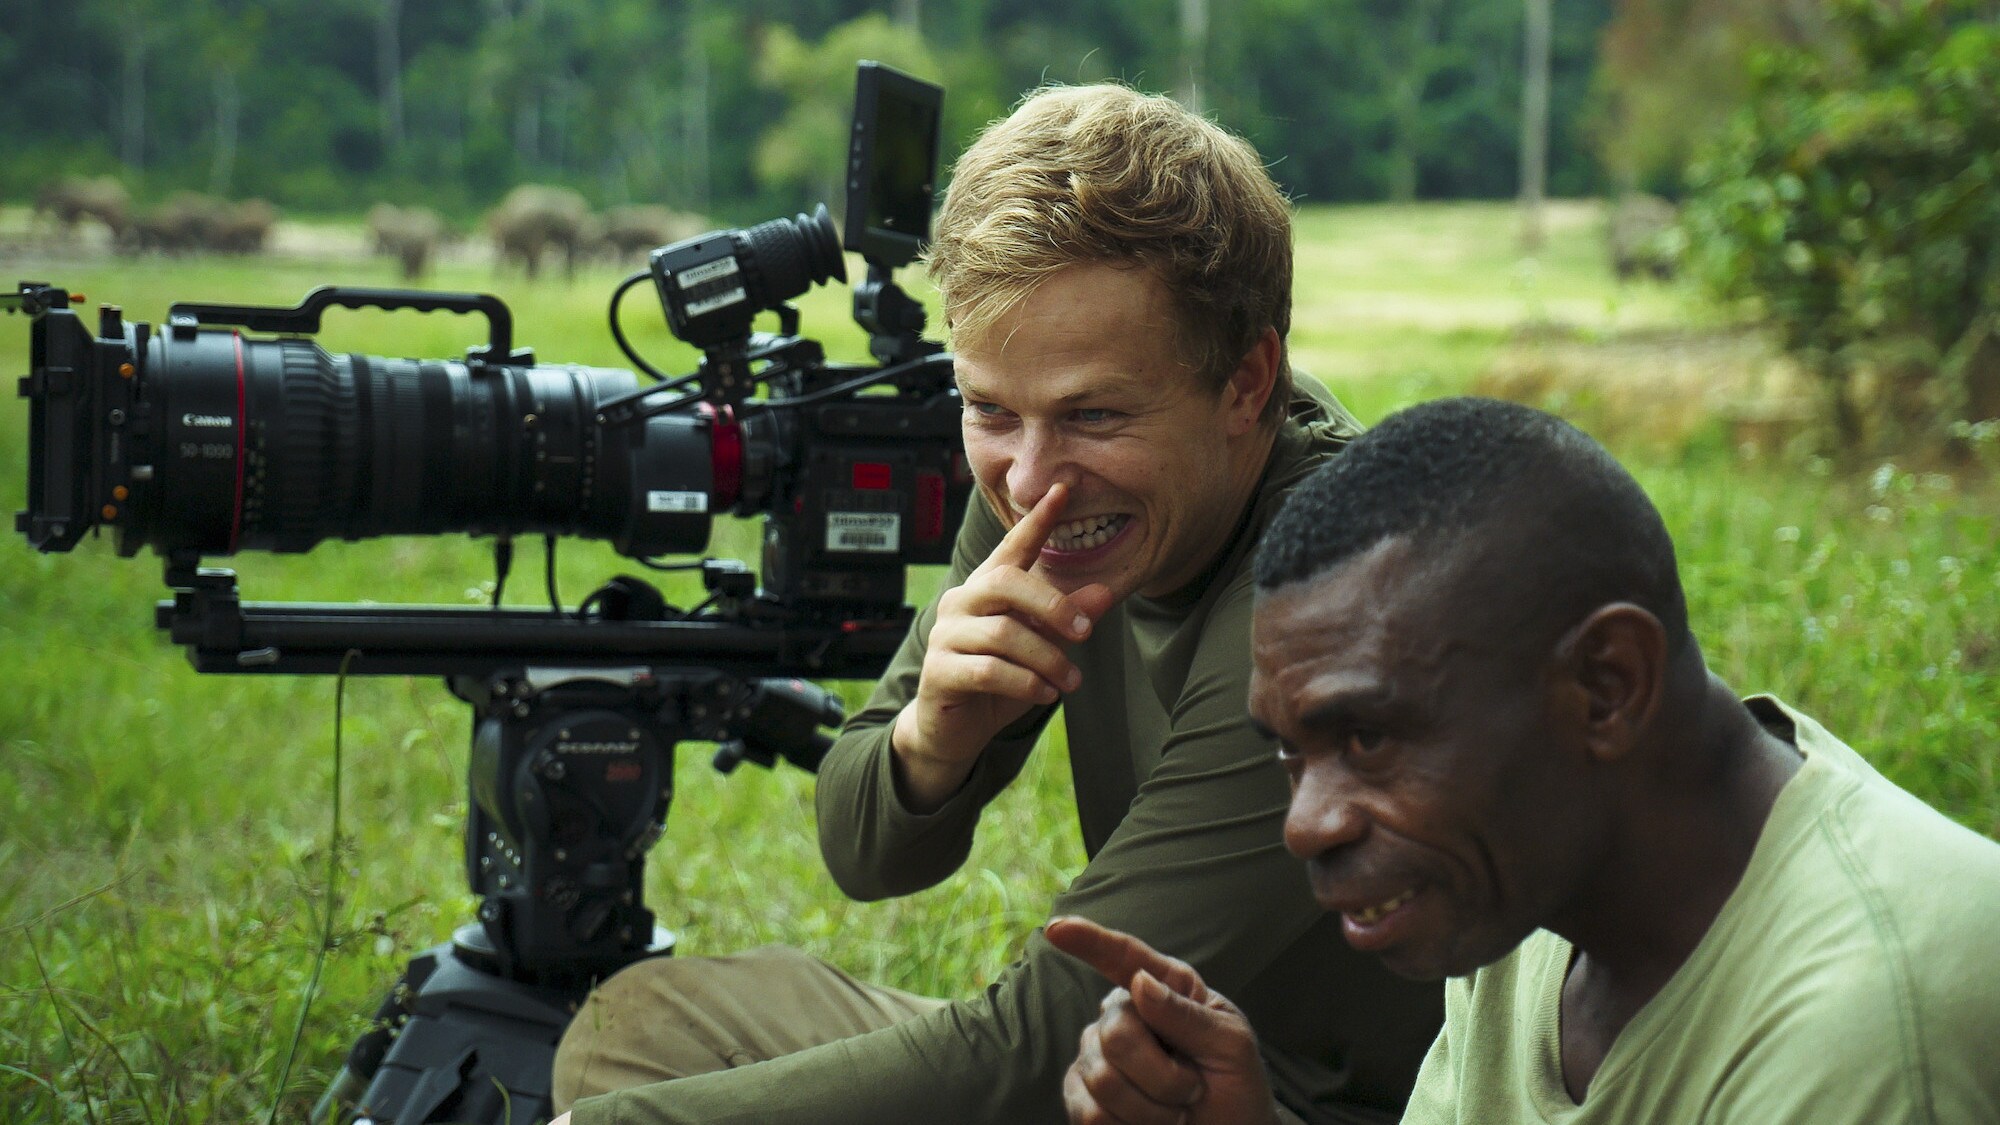 Bertie Gregory and an Ngbanda Bathelomie laughing. (National Geographic for Disney+/Mark Mclean)